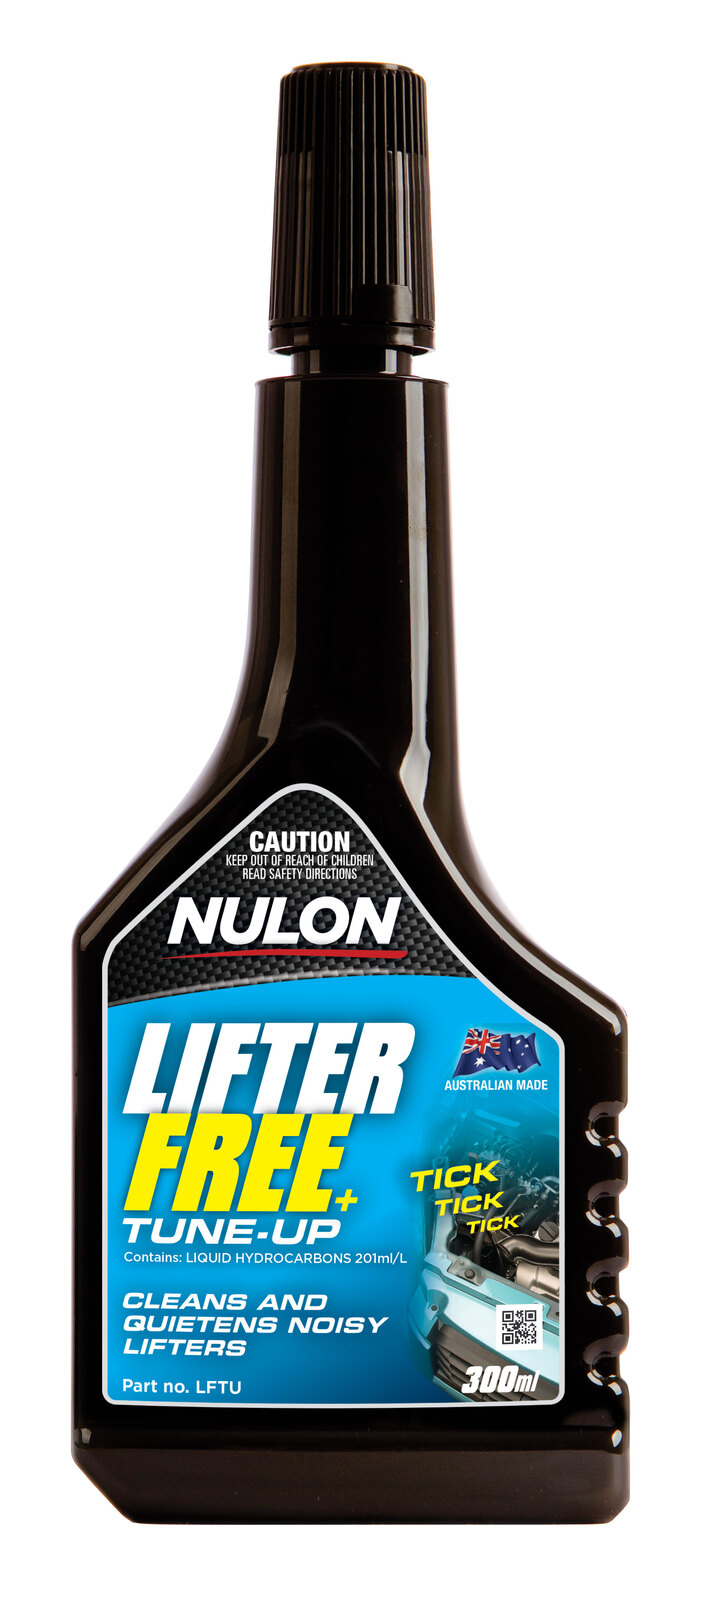 NULON 300ml Lifter Free & Tune-Up, Each